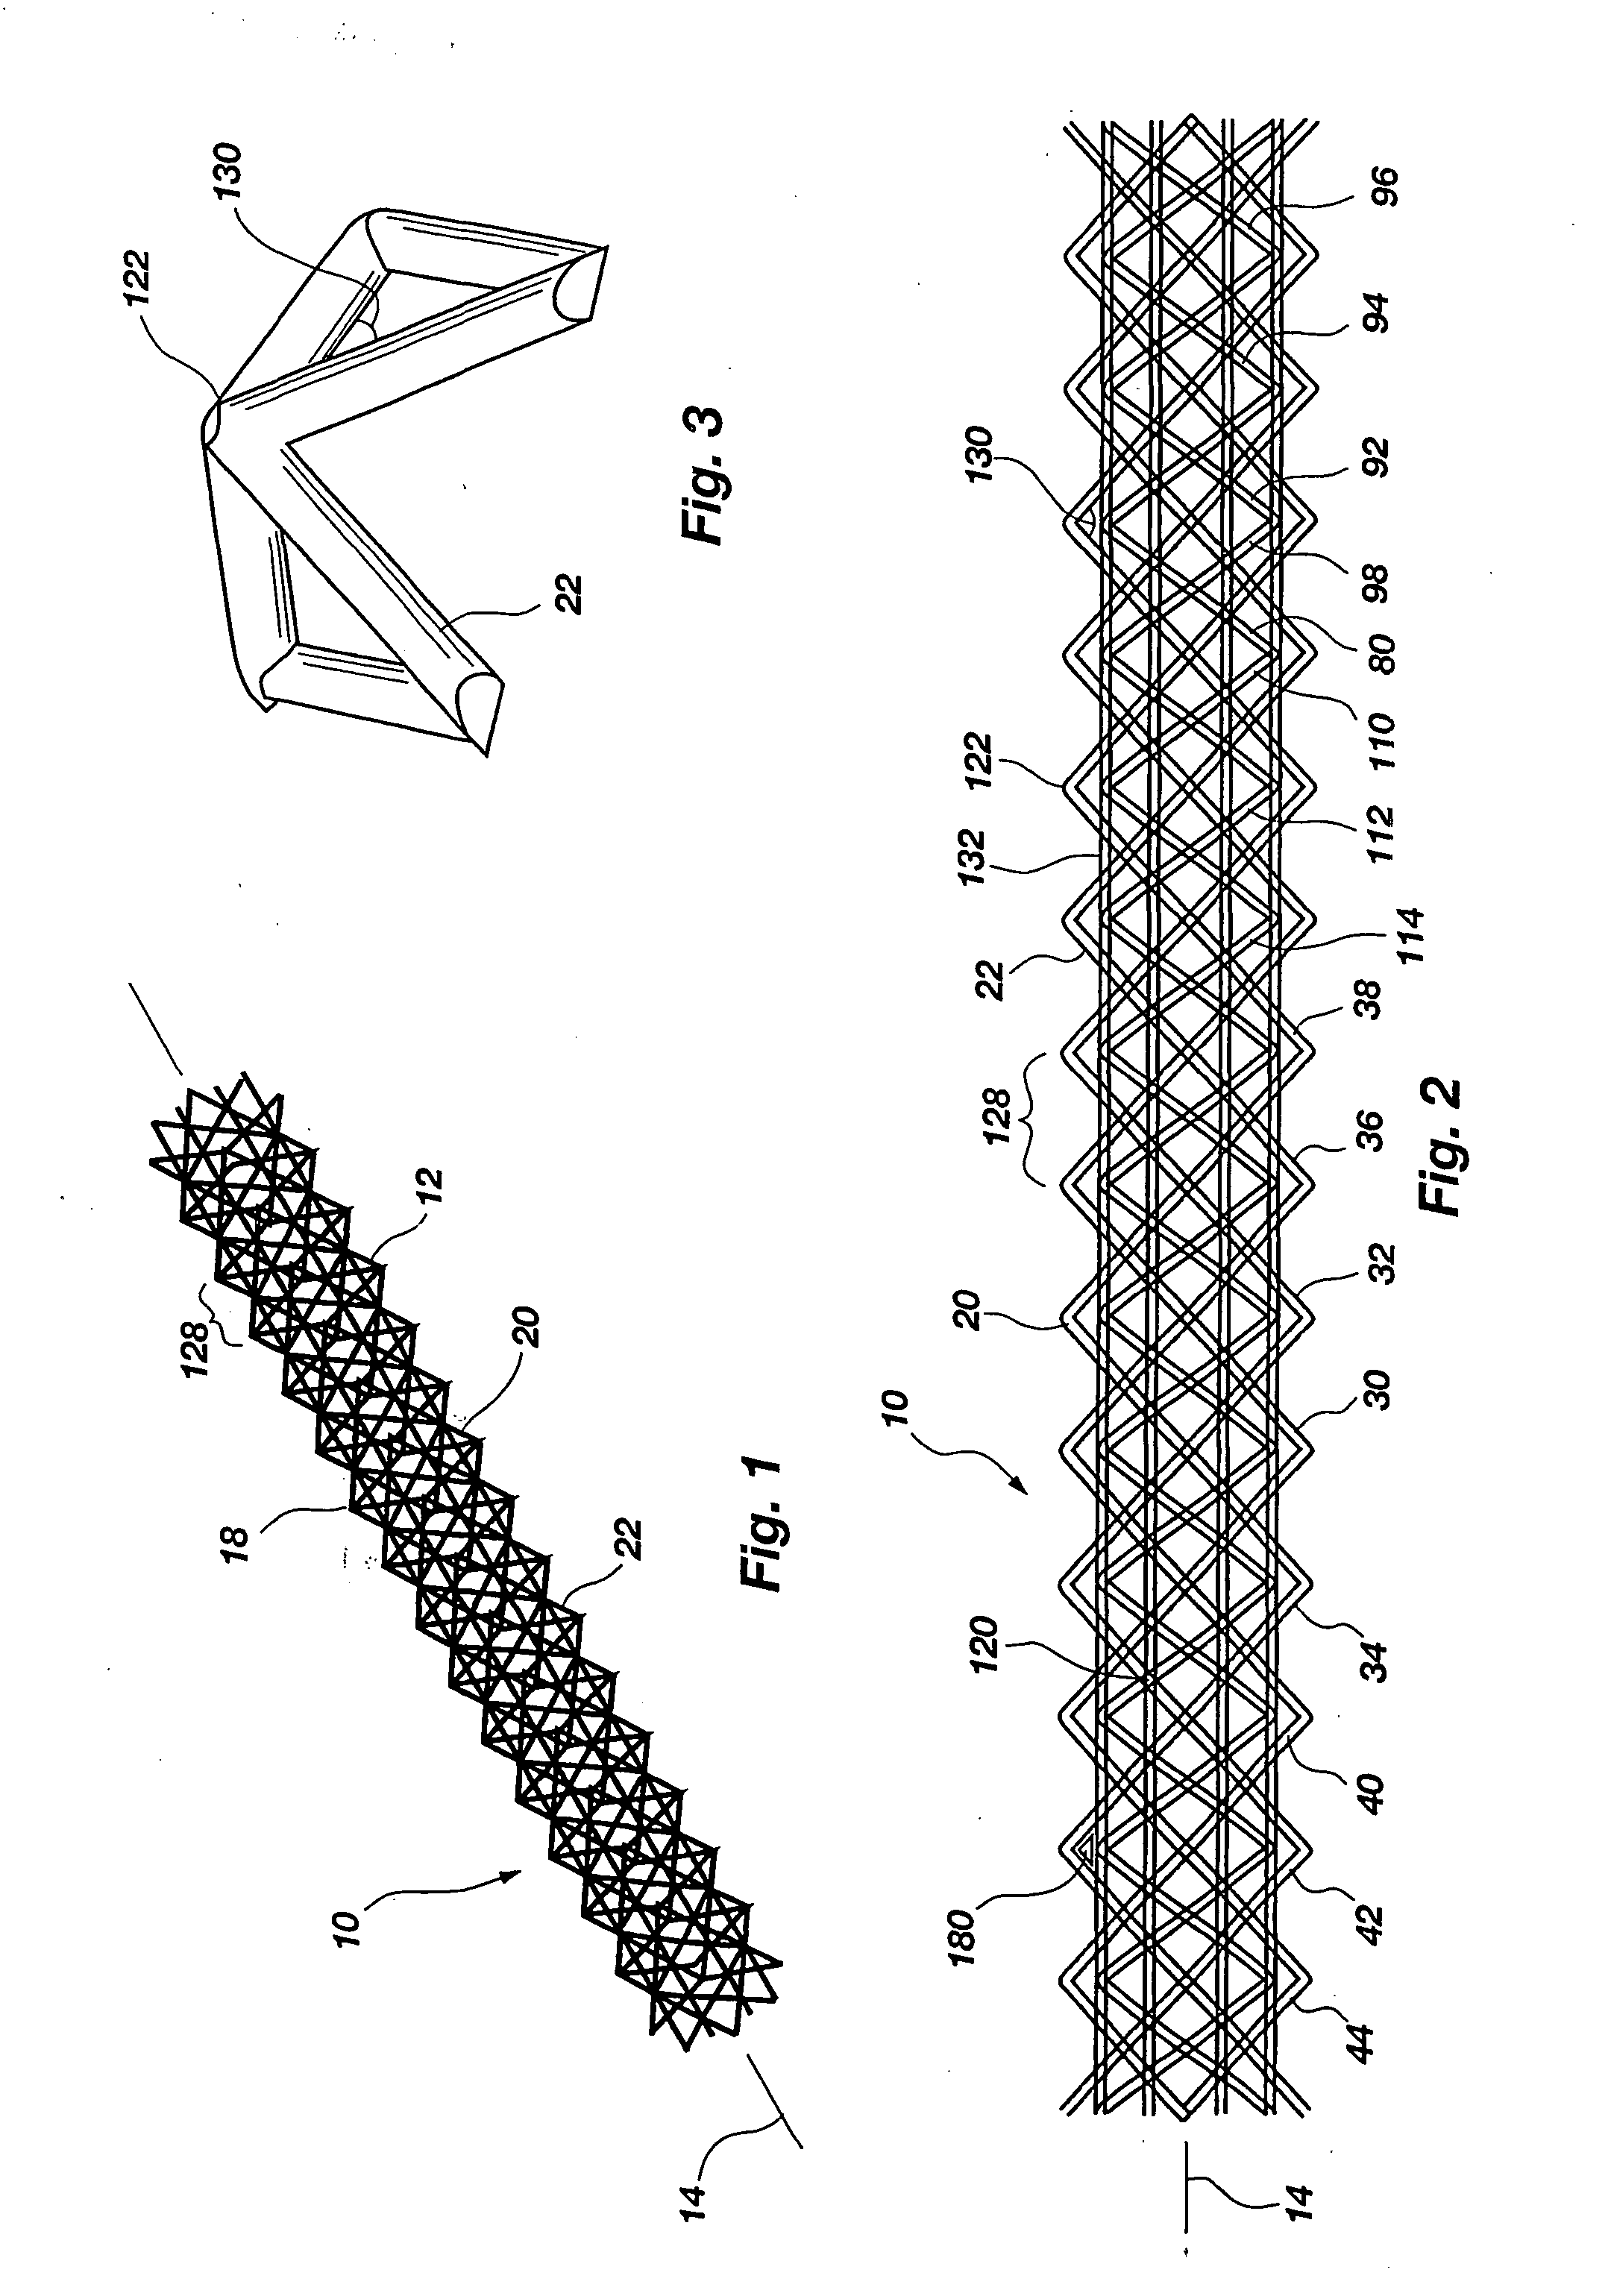 Iso-truss structure